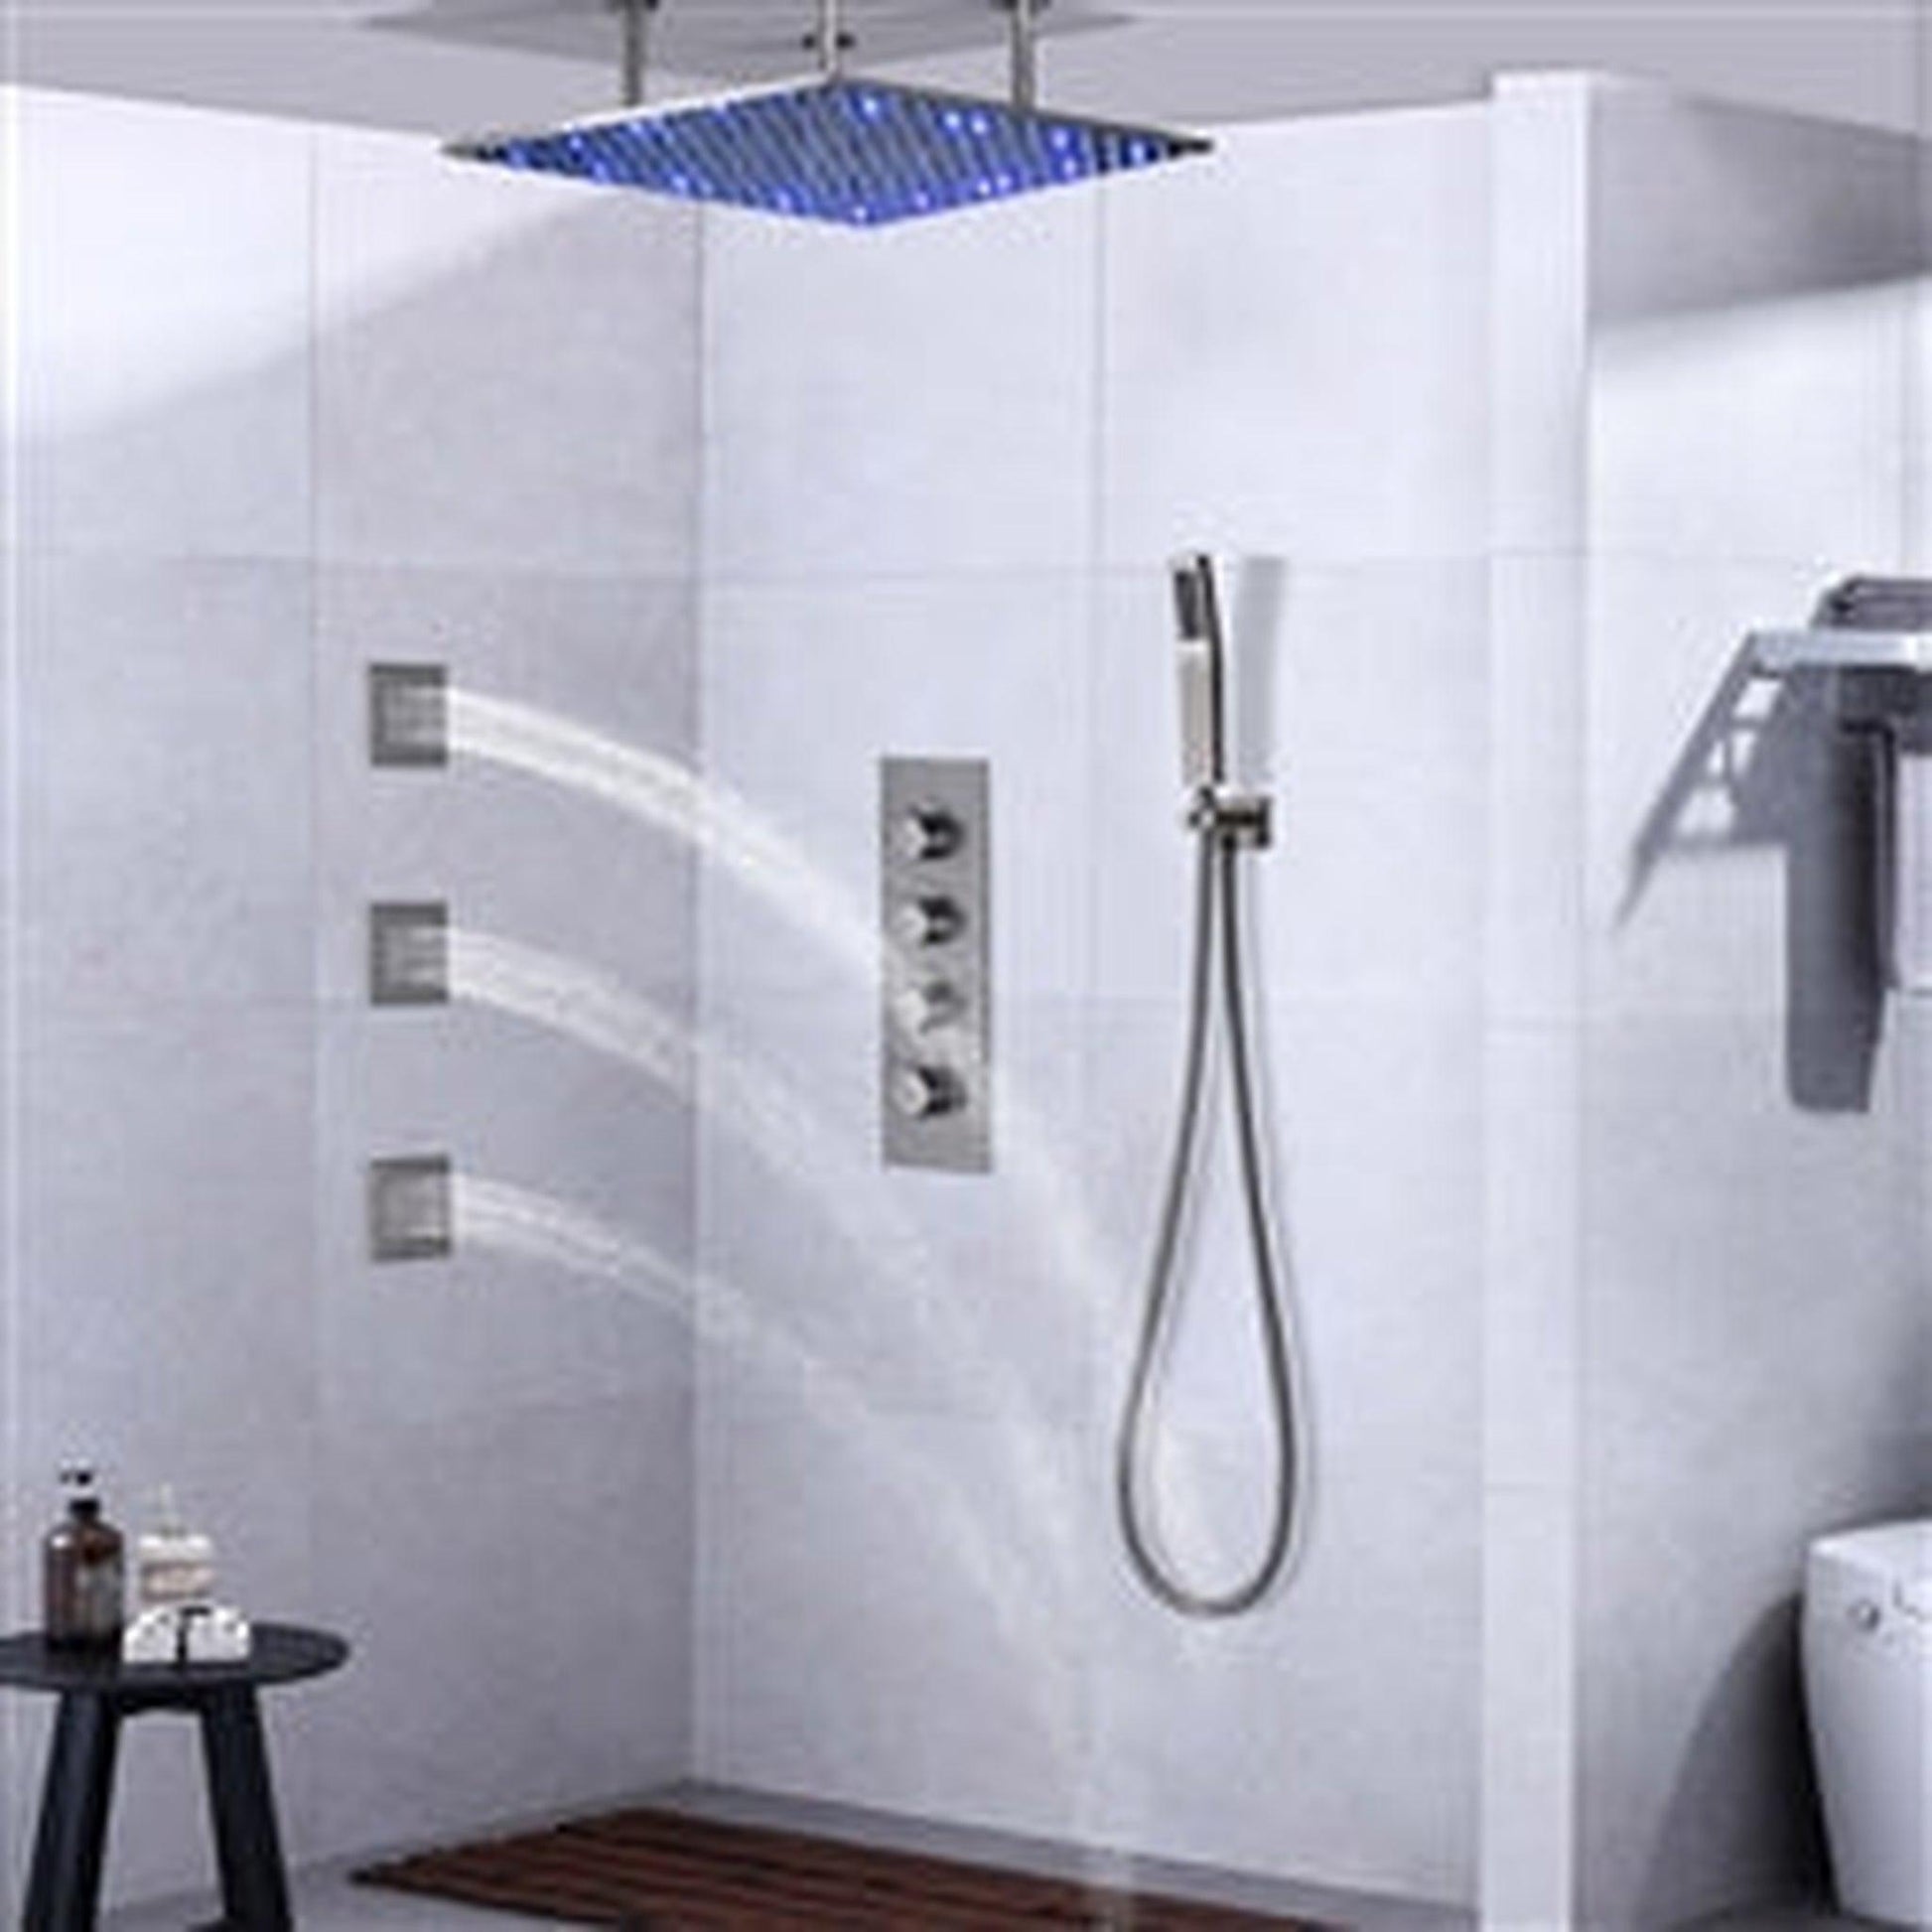 Fontana 31" x 31" Brushed Nickel Ceiling Mounted Thermostatic Valve Shower System With 3-Jet Sprays, Hand Shower and Water Powered LED Lights